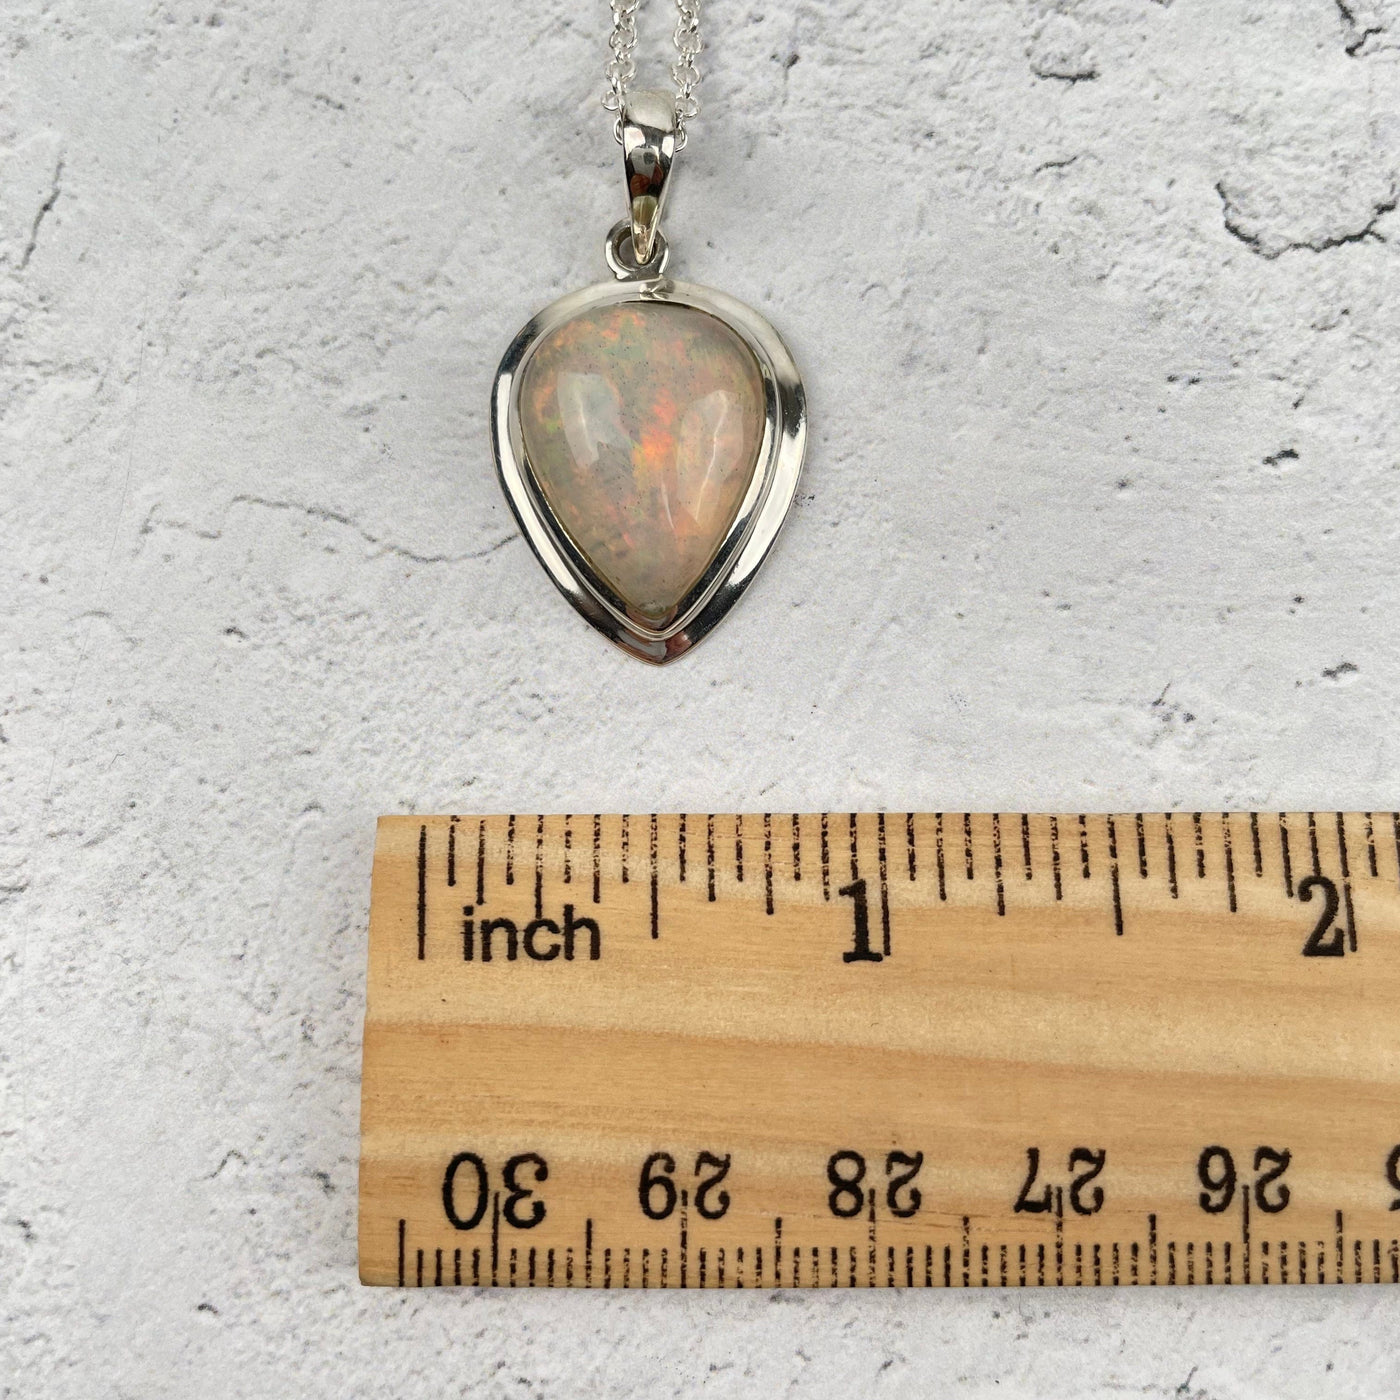 opal pendant displayed next to a ruler for size reference 